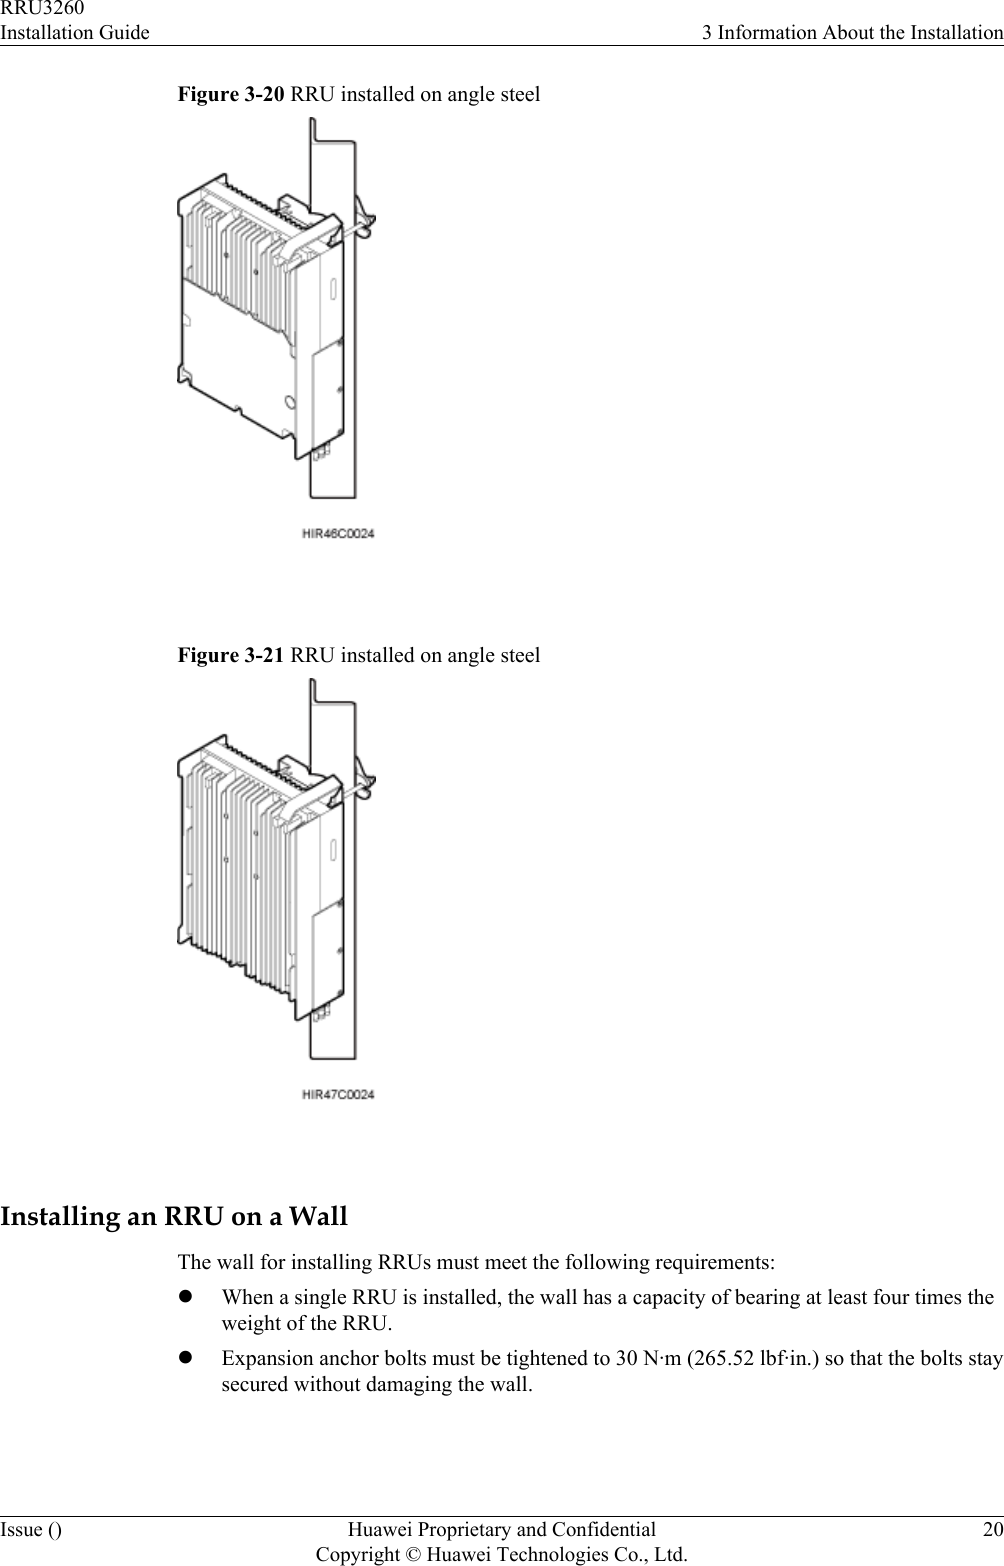 Figure 3-20 RRU installed on angle steel Figure 3-21 RRU installed on angle steel Installing an RRU on a WallThe wall for installing RRUs must meet the following requirements:lWhen a single RRU is installed, the wall has a capacity of bearing at least four times theweight of the RRU.lExpansion anchor bolts must be tightened to 30 N·m (265.52 lbf·in.) so that the bolts staysecured without damaging the wall.RRU3260Installation Guide 3 Information About the InstallationIssue () Huawei Proprietary and ConfidentialCopyright © Huawei Technologies Co., Ltd.20